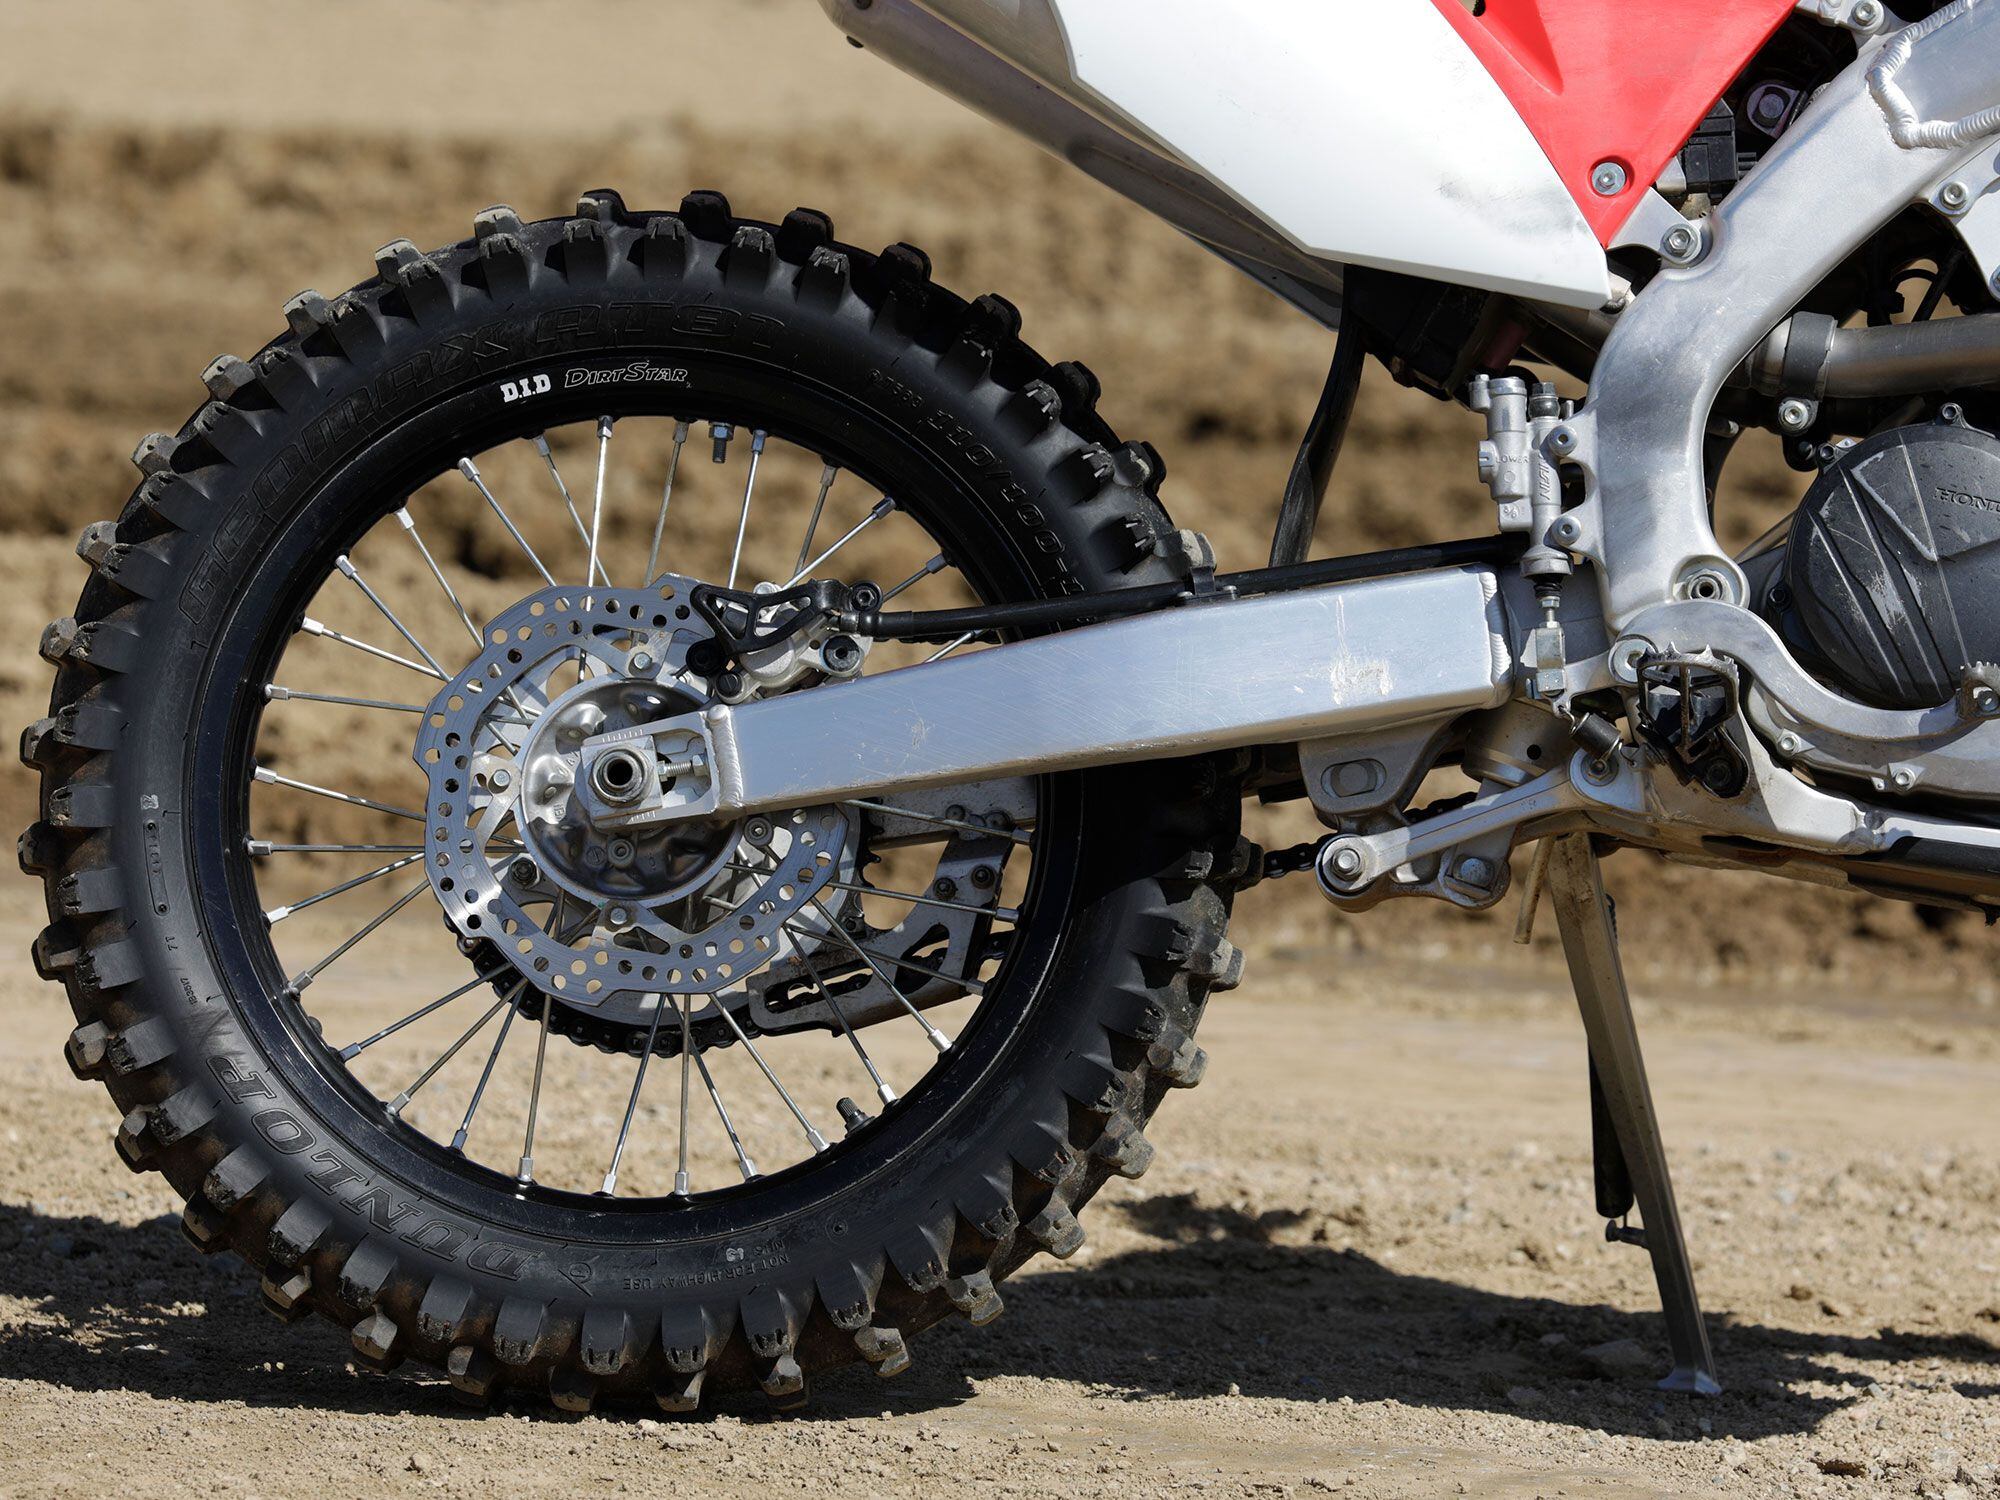 The CRF250RX employs a more forgiving 18-inch rear wheel versus the 19-inch found on a moto bike. This affords greater comfort on trail with an extra degree of tire sidewall cushion.